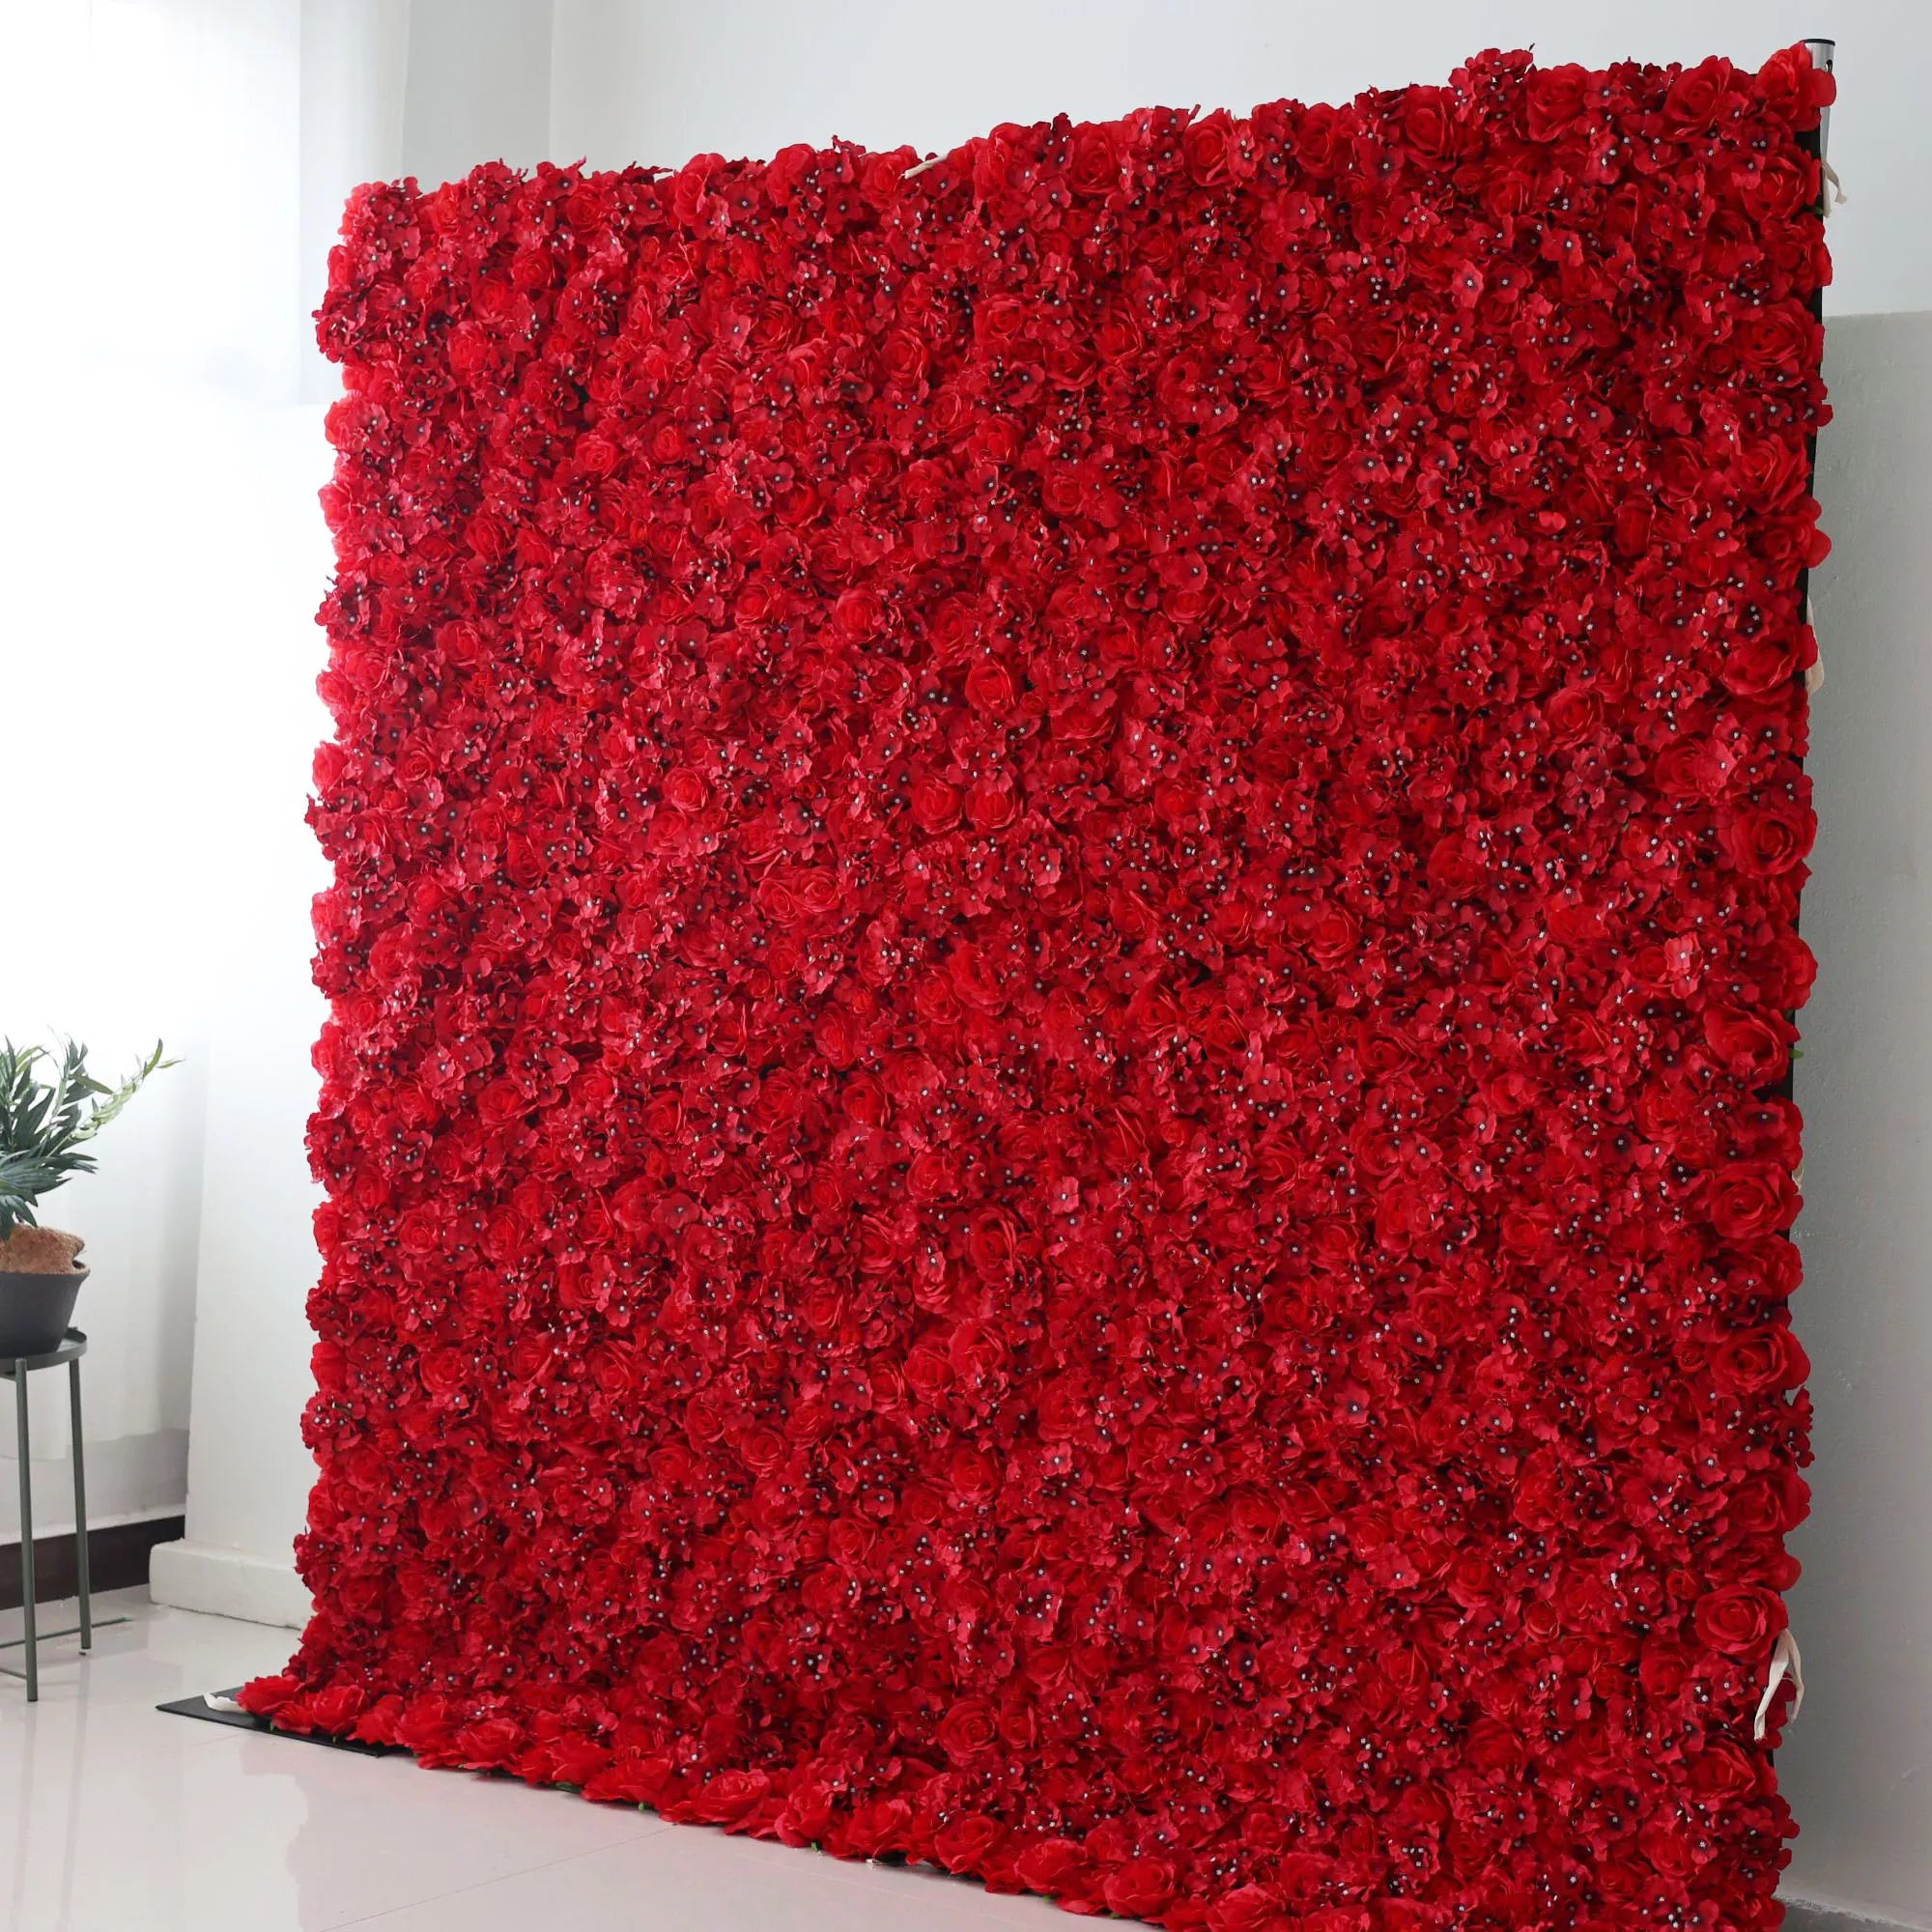 Valar Flowers Roll Up Artificial Flower Wall Backdrop in Radiant Red Rhapsody for Passionate Gatherings and Intimate Affairs - VF-2321